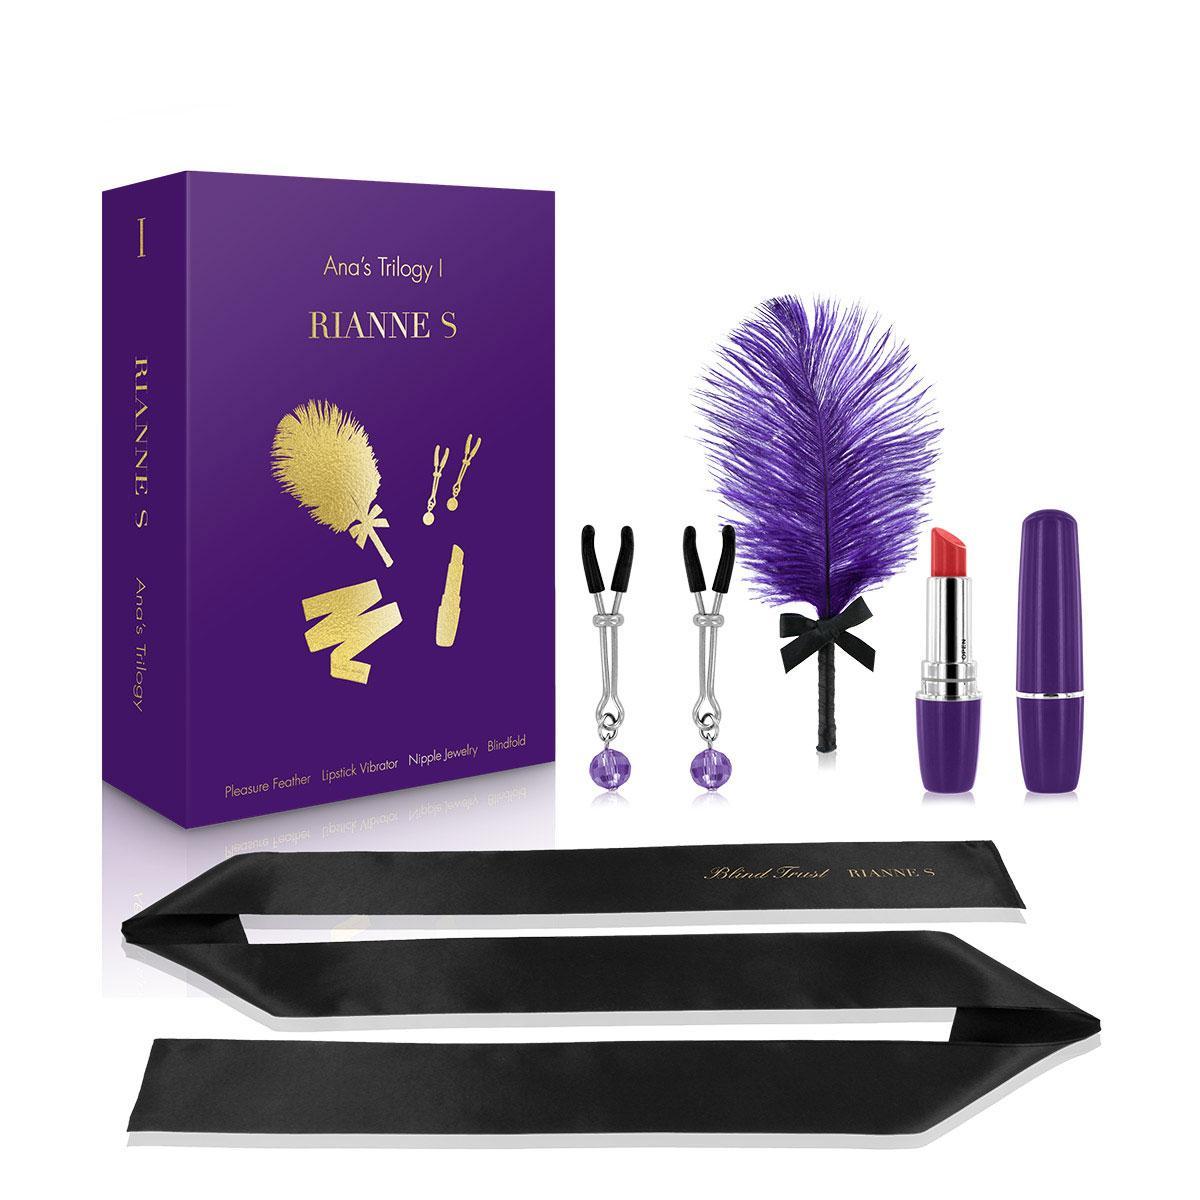 Rianne S Ana's Trilogy Kit One - Buy At Luxury Toy X - Free 3-Day Shipping